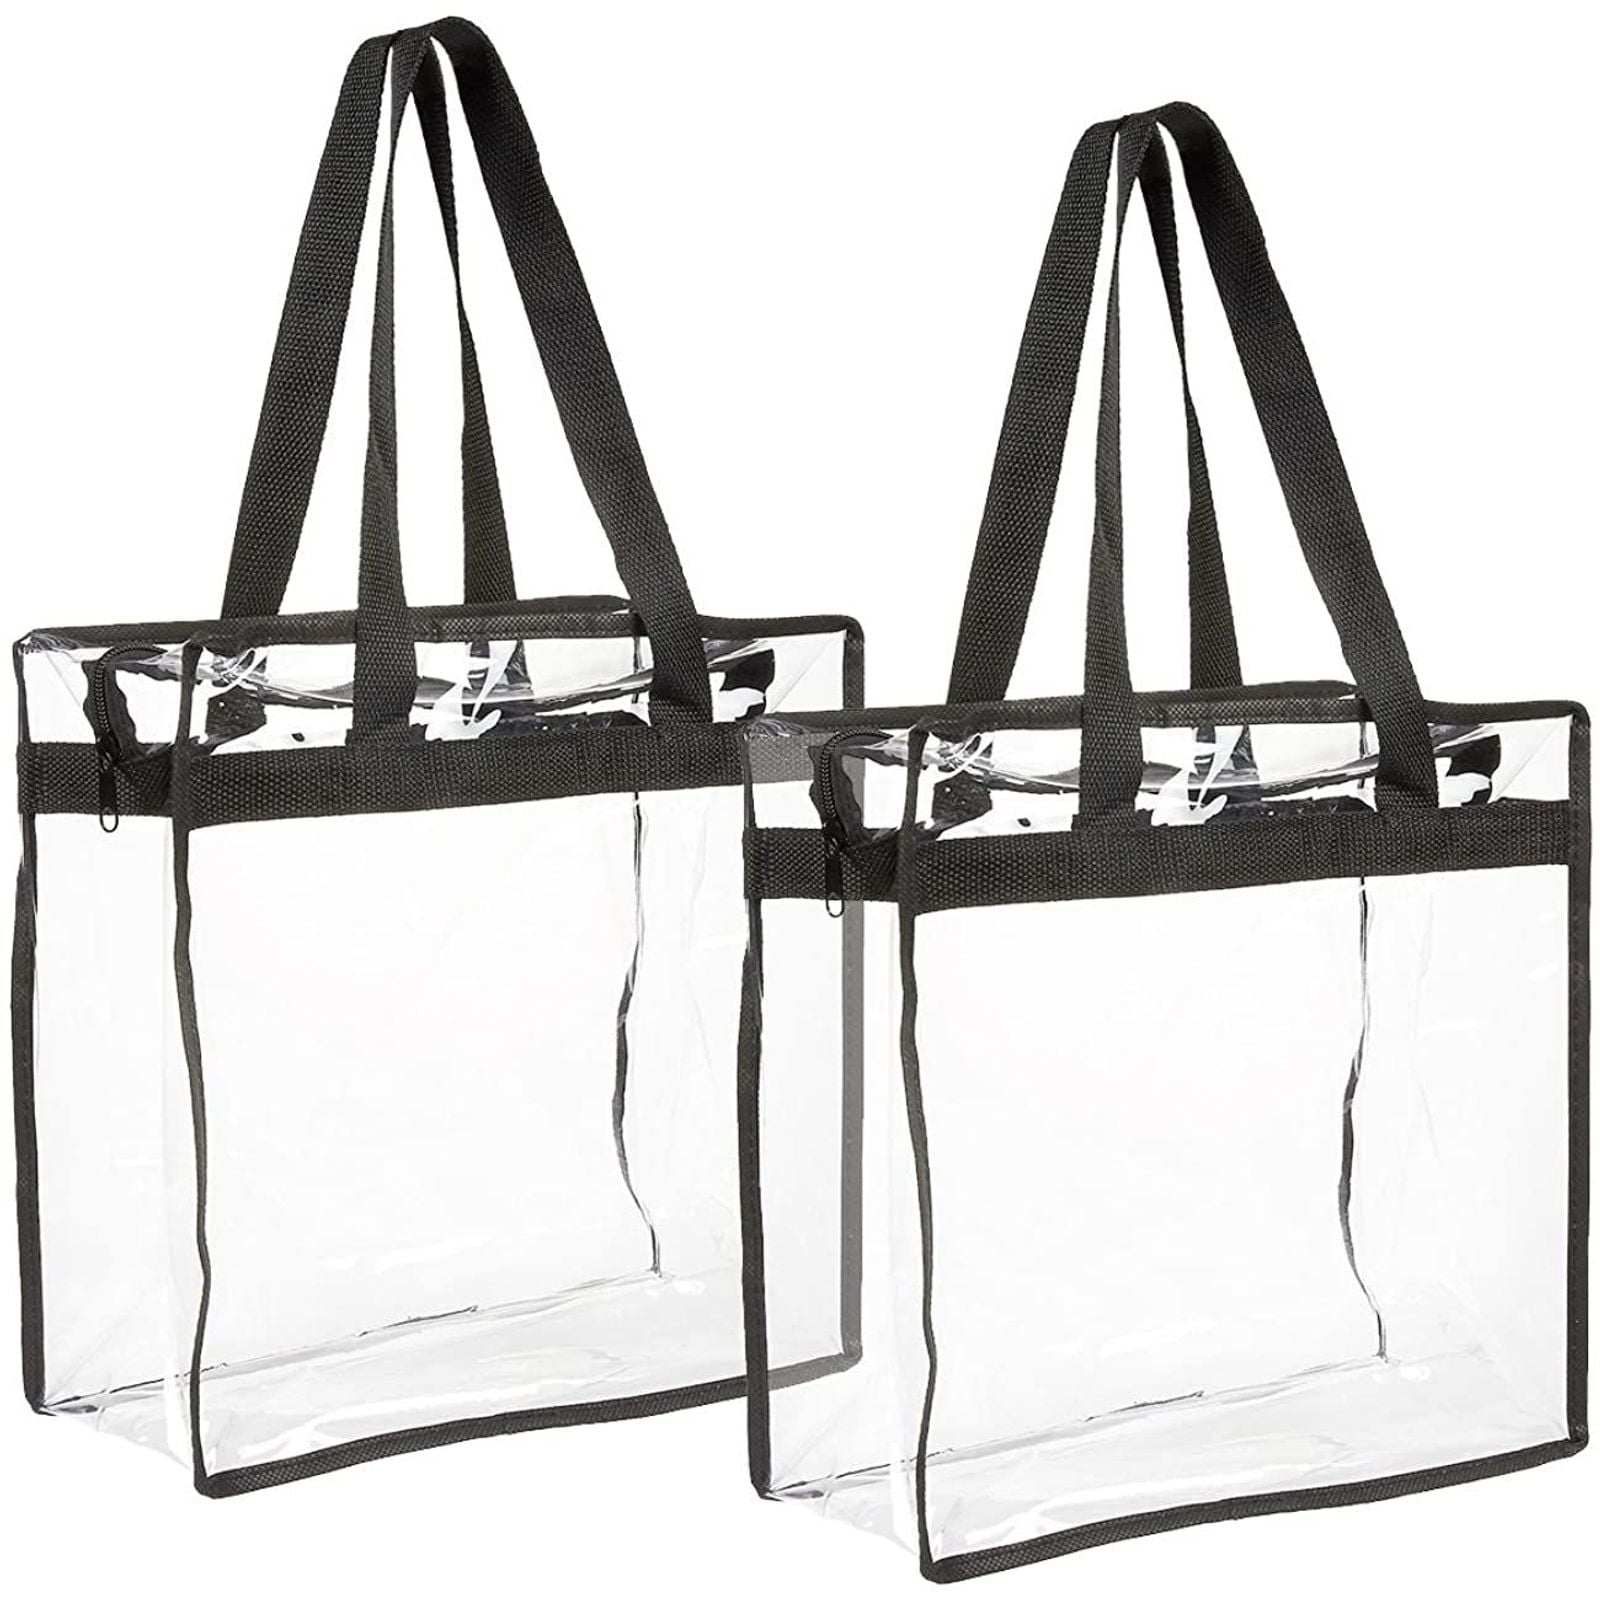 Big Large Beautiful Transparent PVC Clear Tote Handbag Bag with Clear Strap